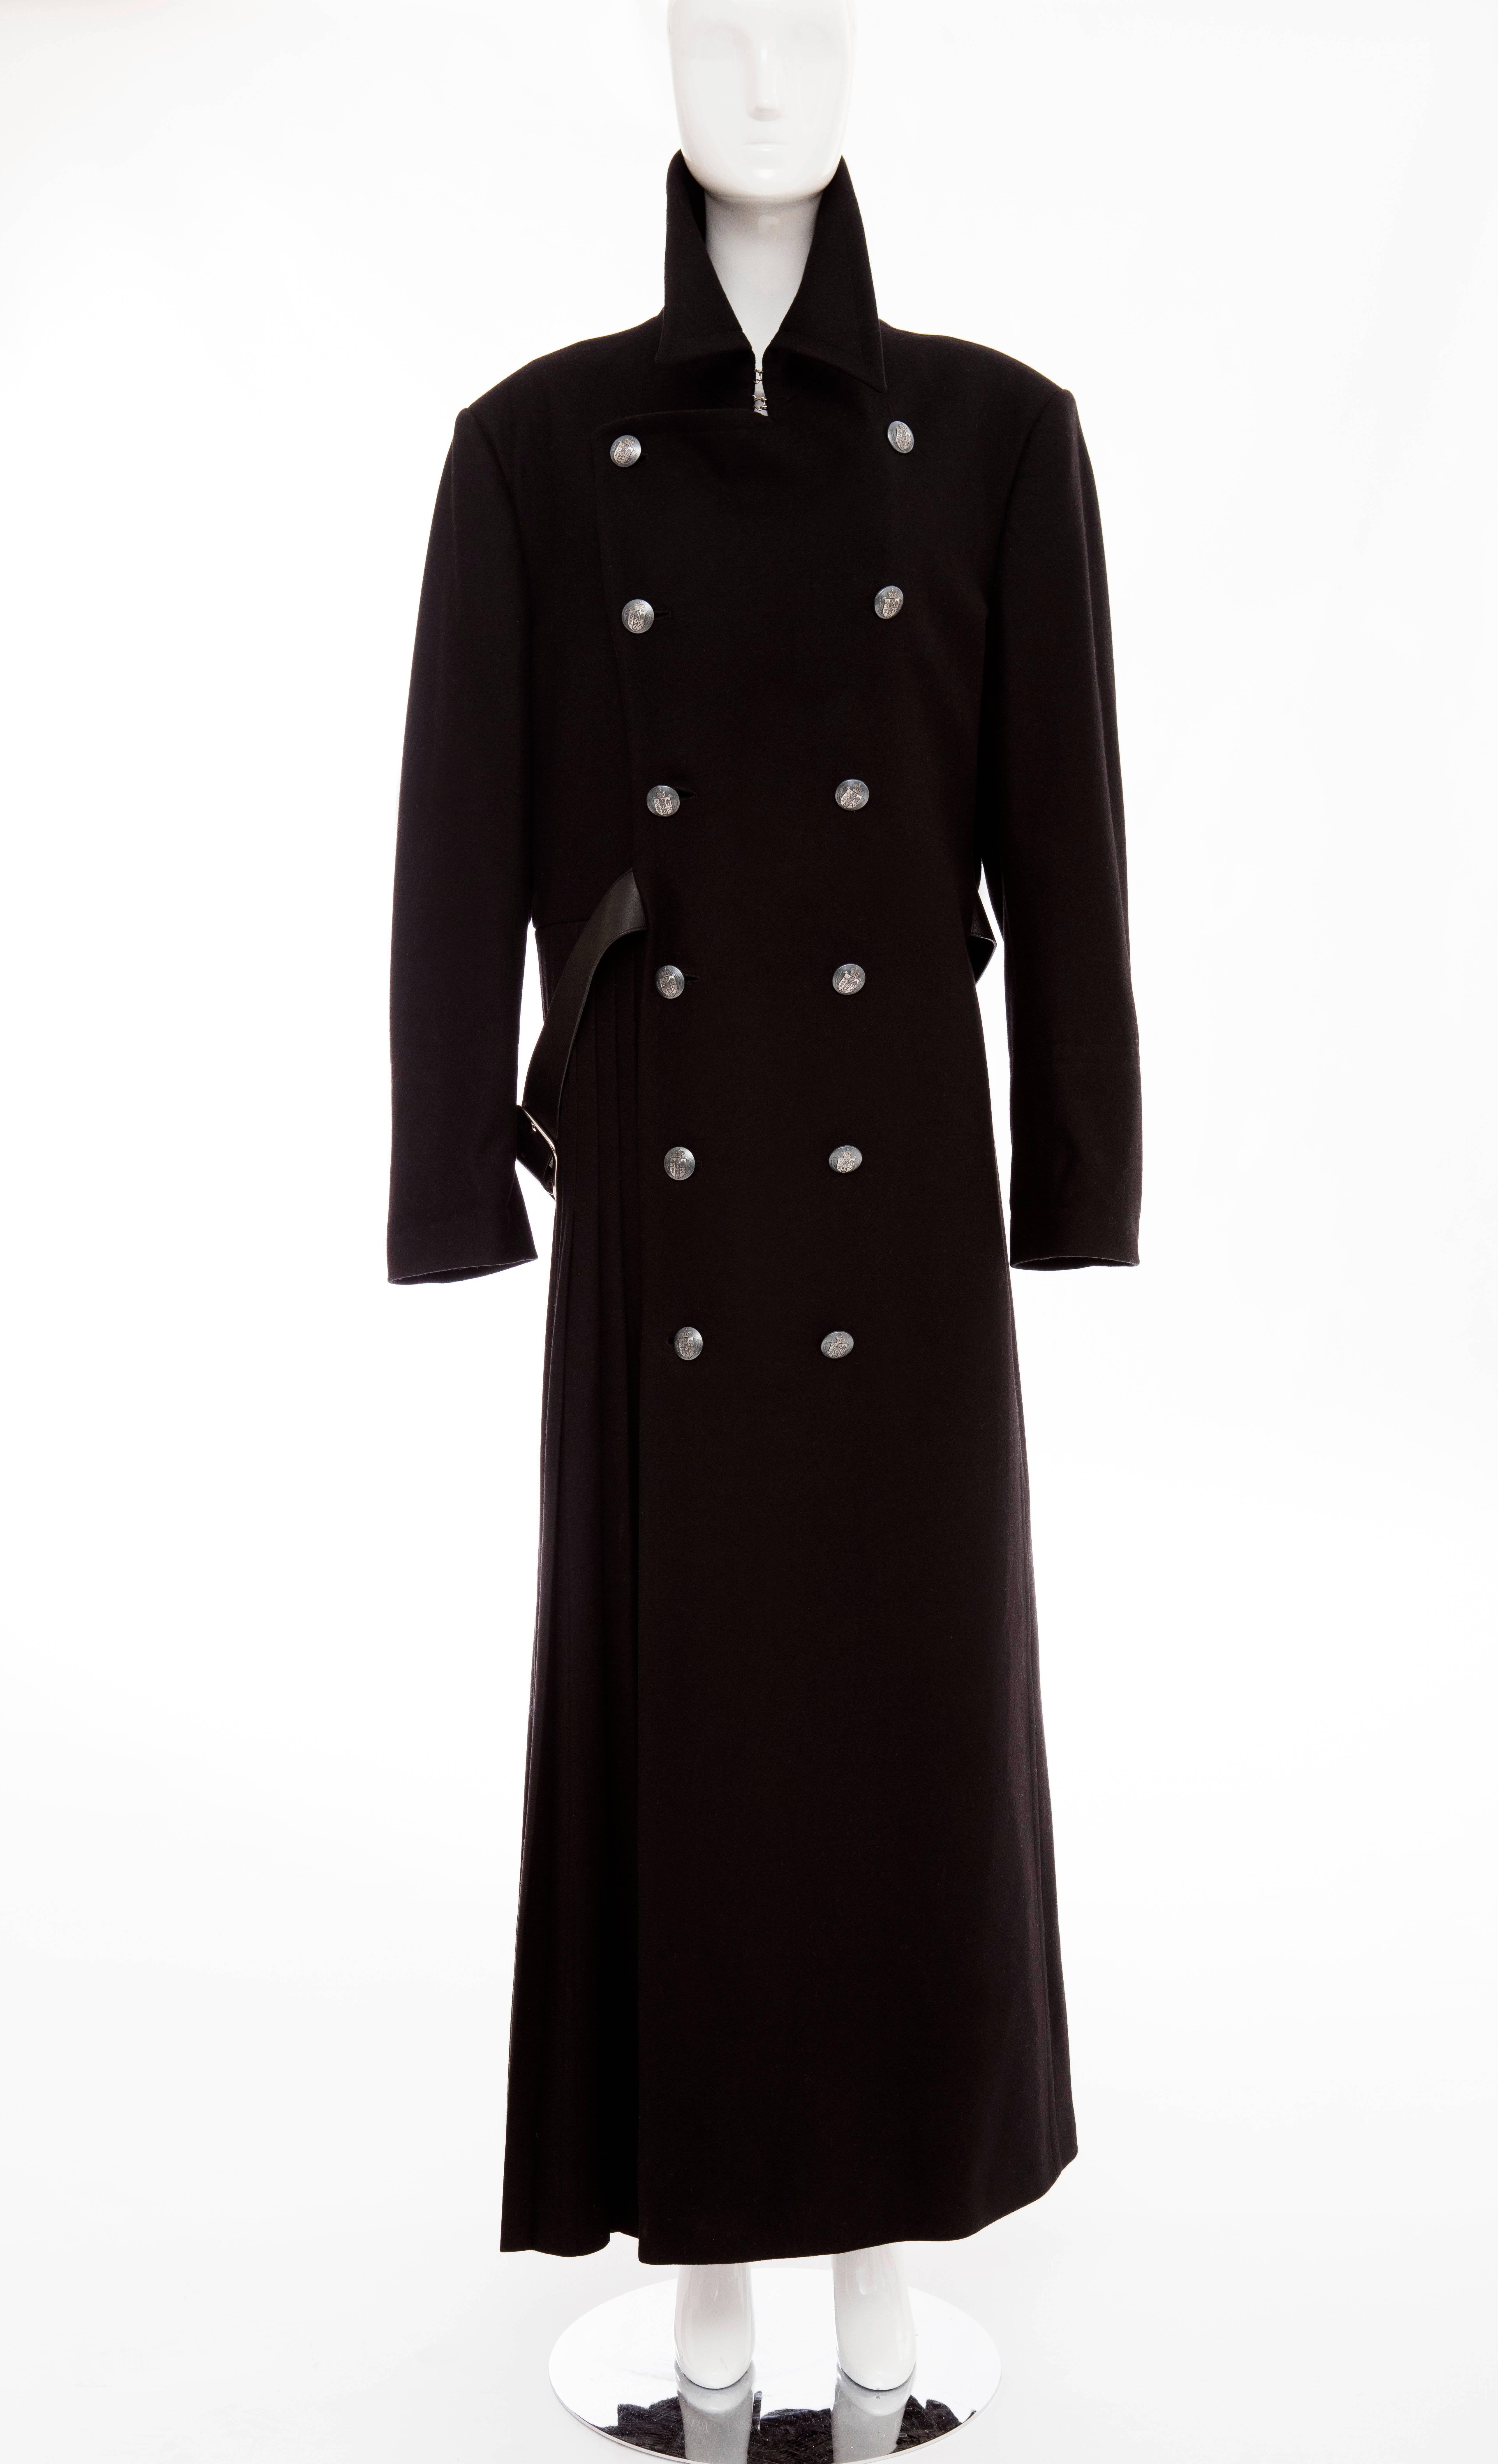 John Bartlett, Autumn-Winter 2000 runway black wool double breasted men's coat with right side and back pleats, front pocket and interior pocket with leather belt.


Chest 44